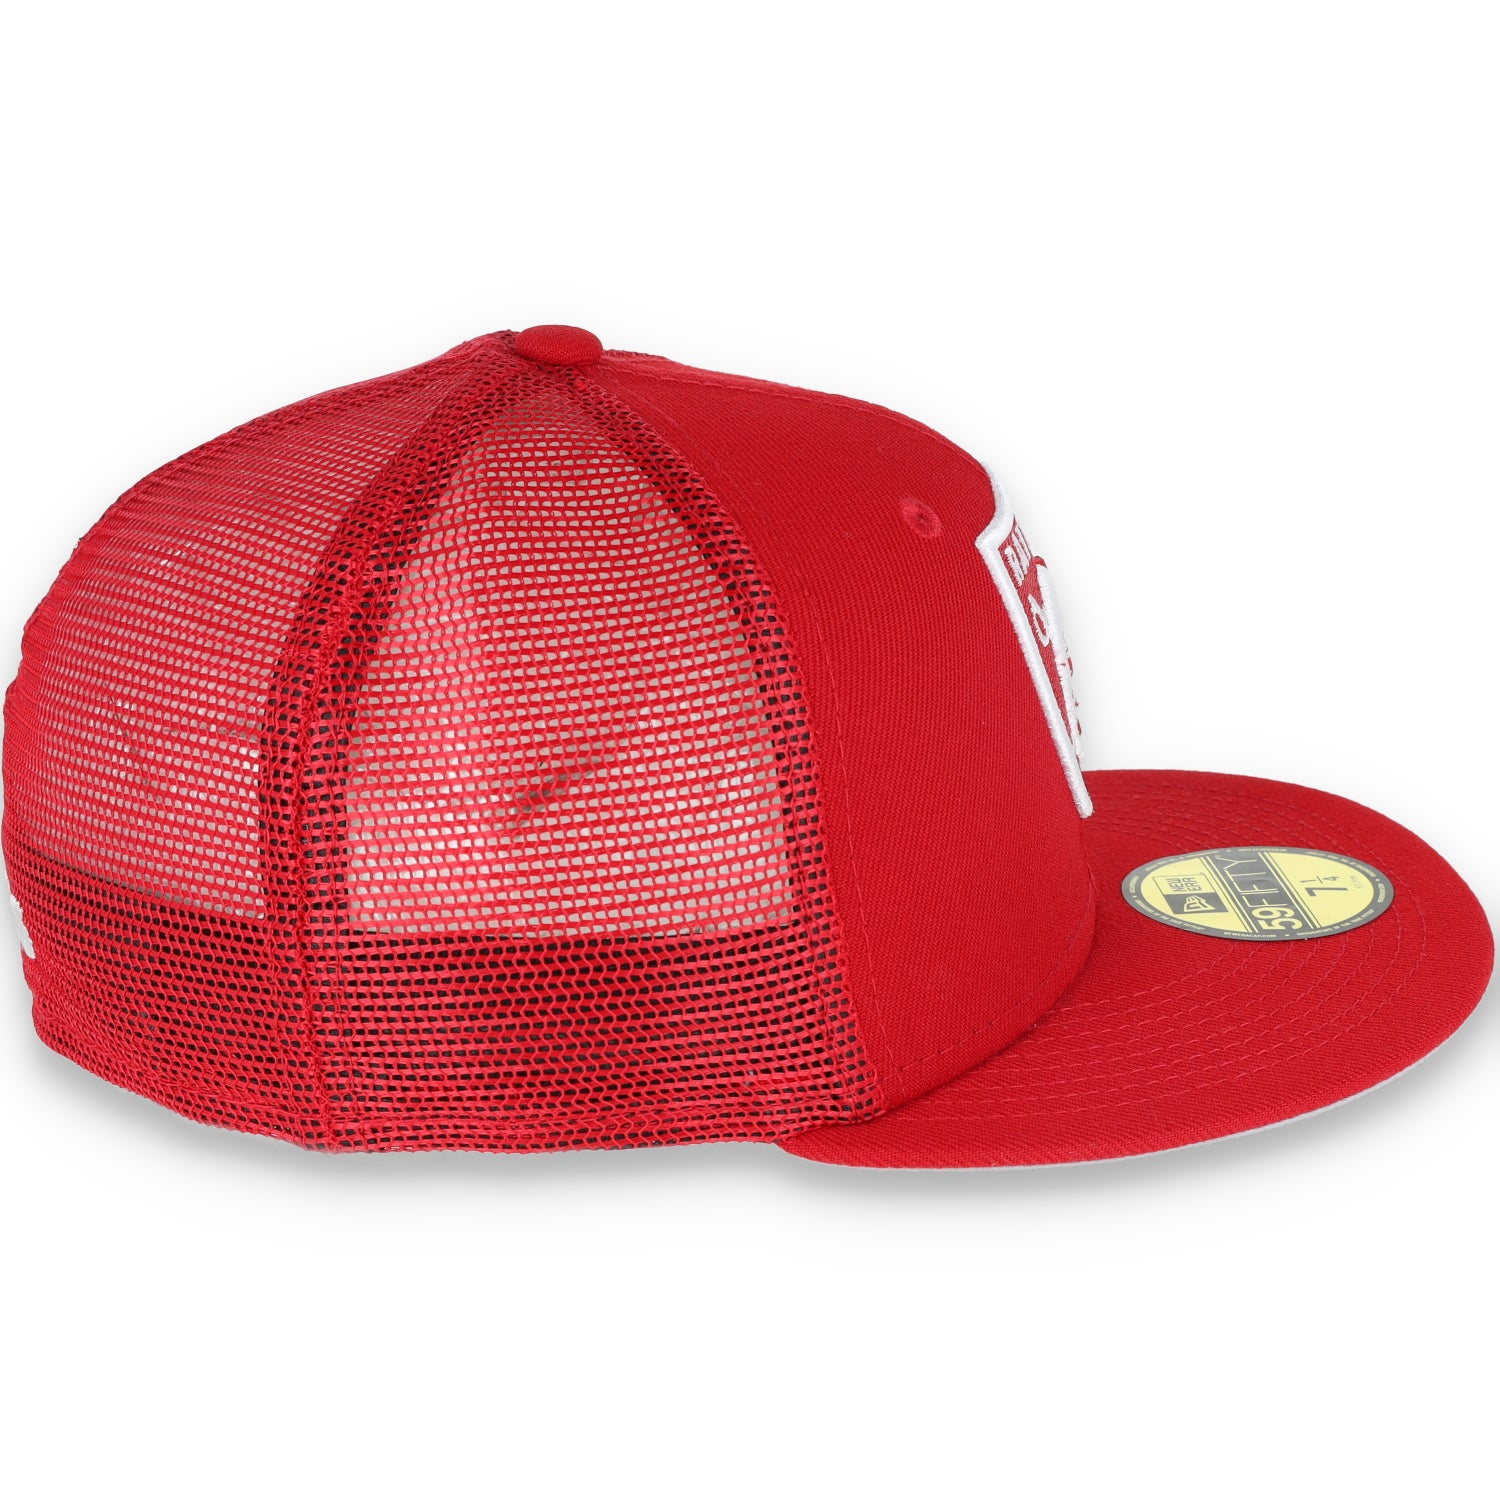 New Era Las Vegas Raiders Shield 59Fifty Fitted Hat-Red/Mesh